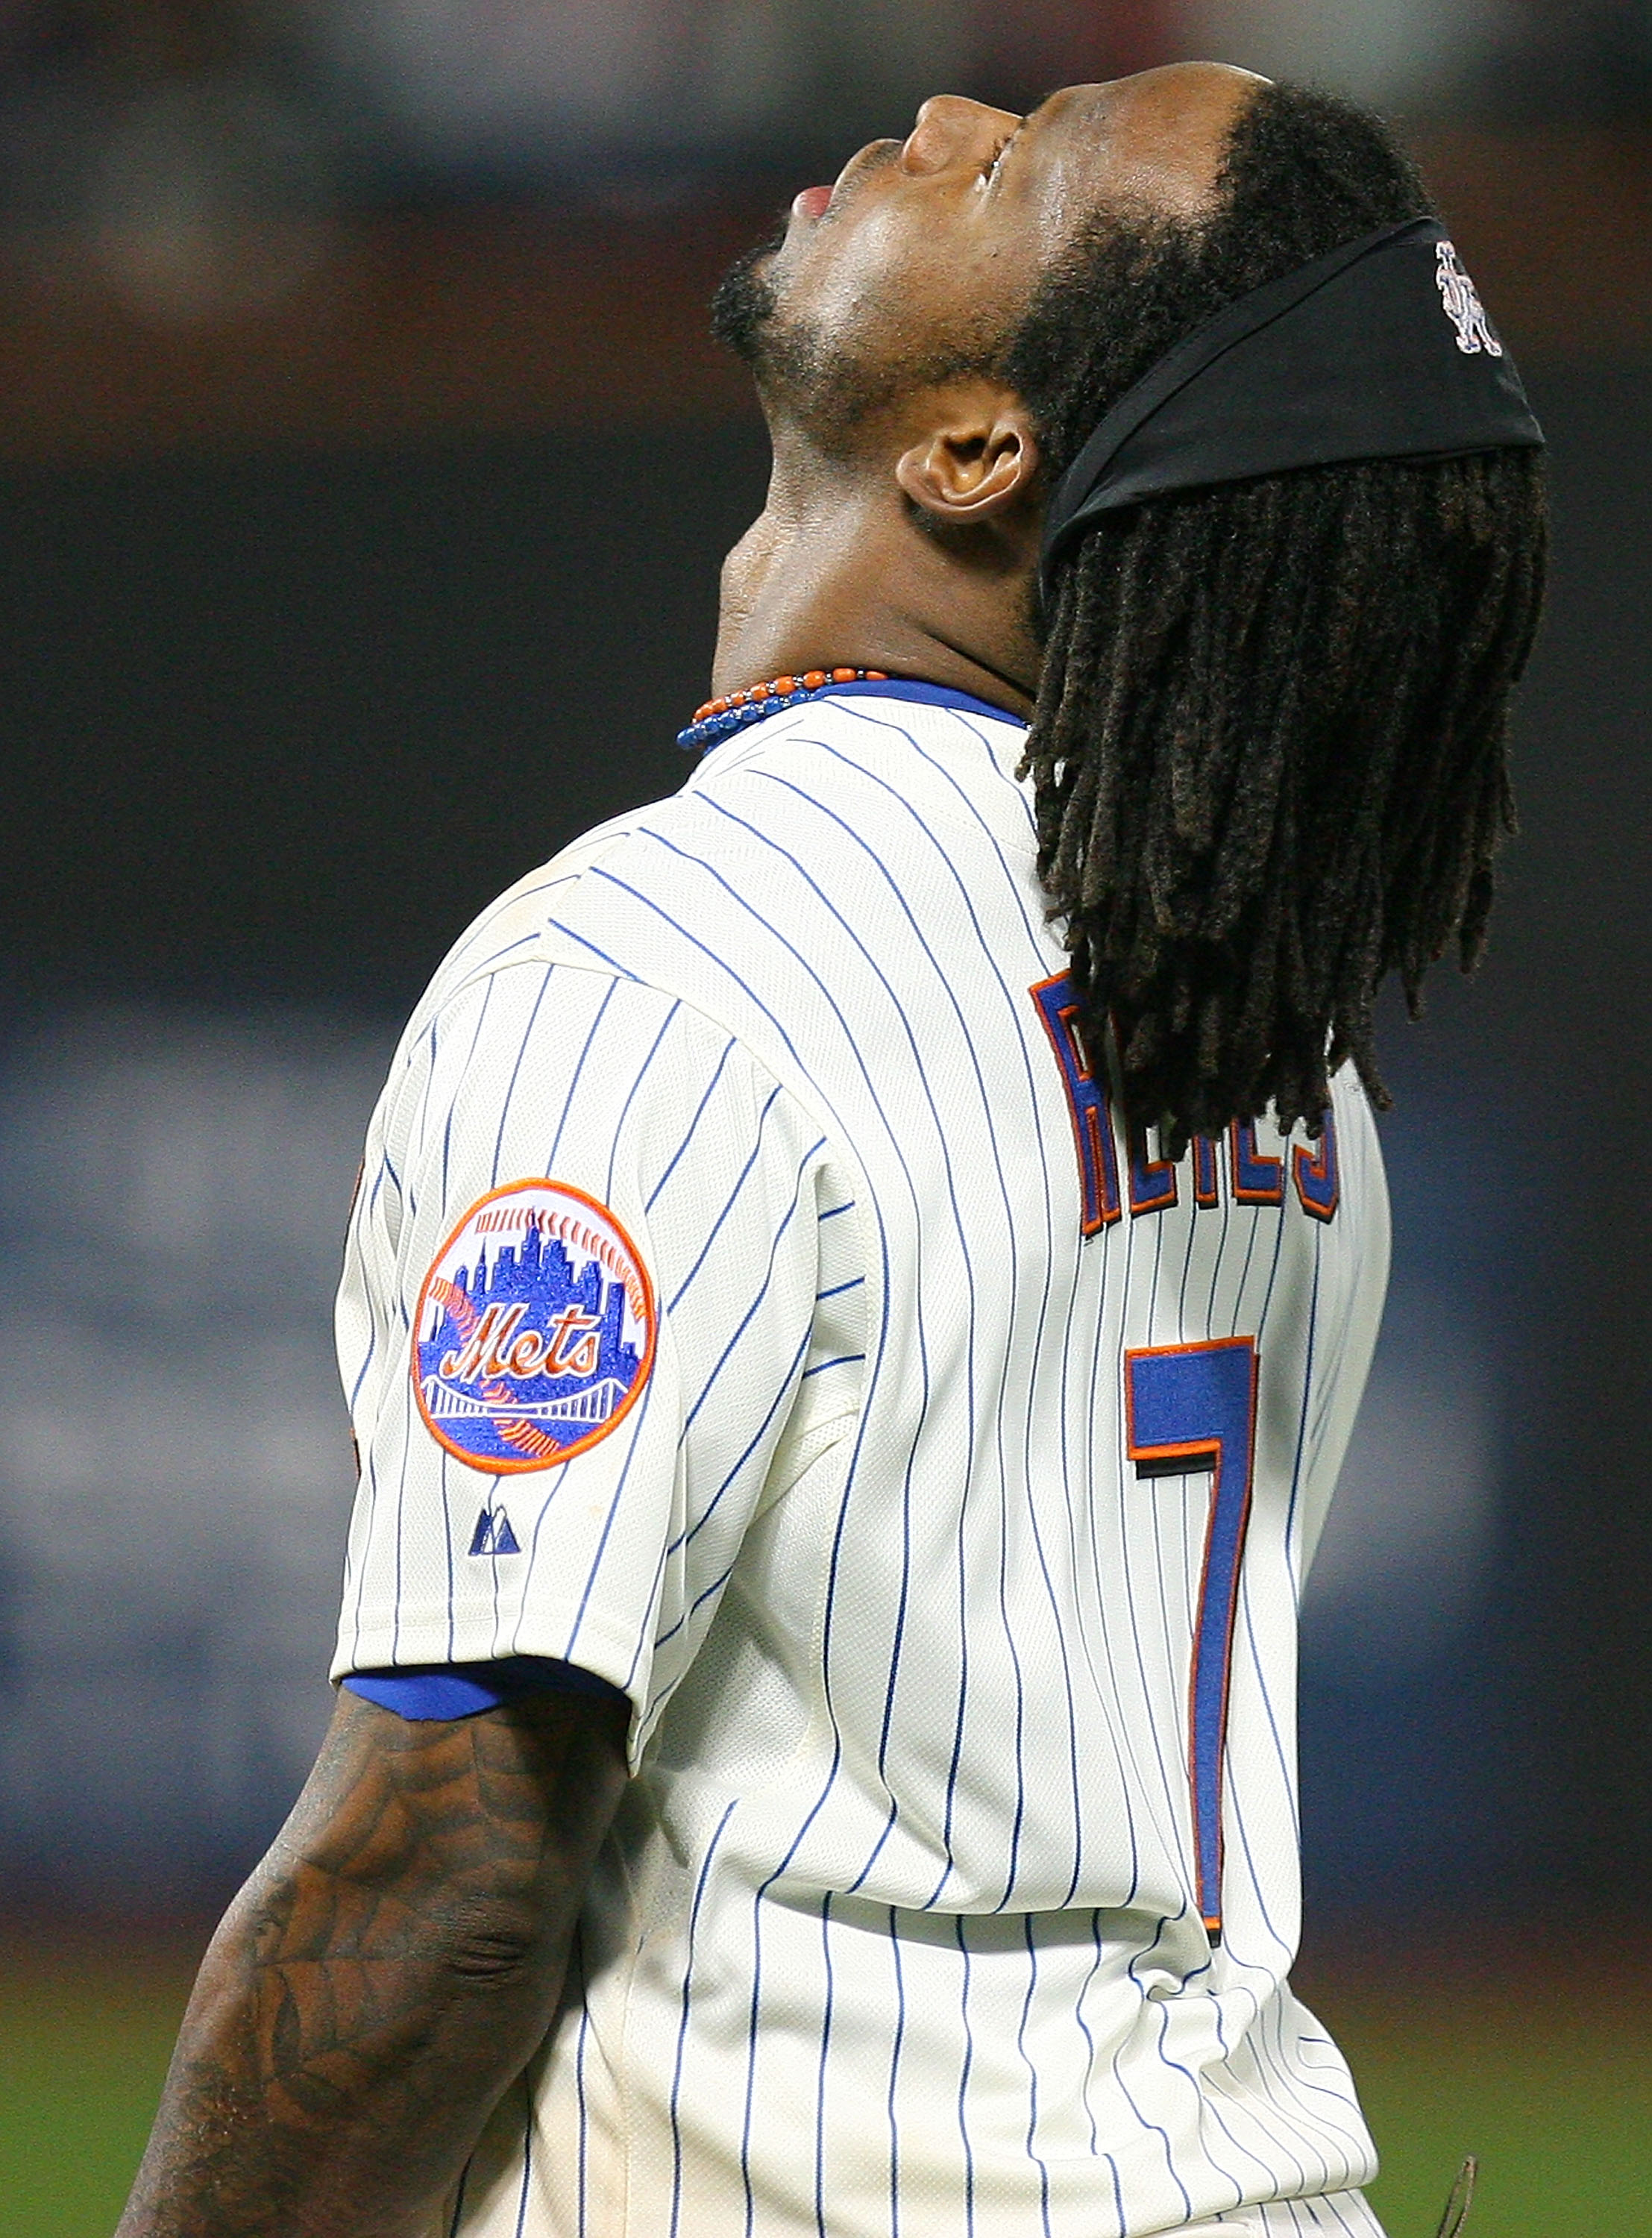 What was once a very promising career for Jose Reyes has slowly become an uphill battle just to stay healthy